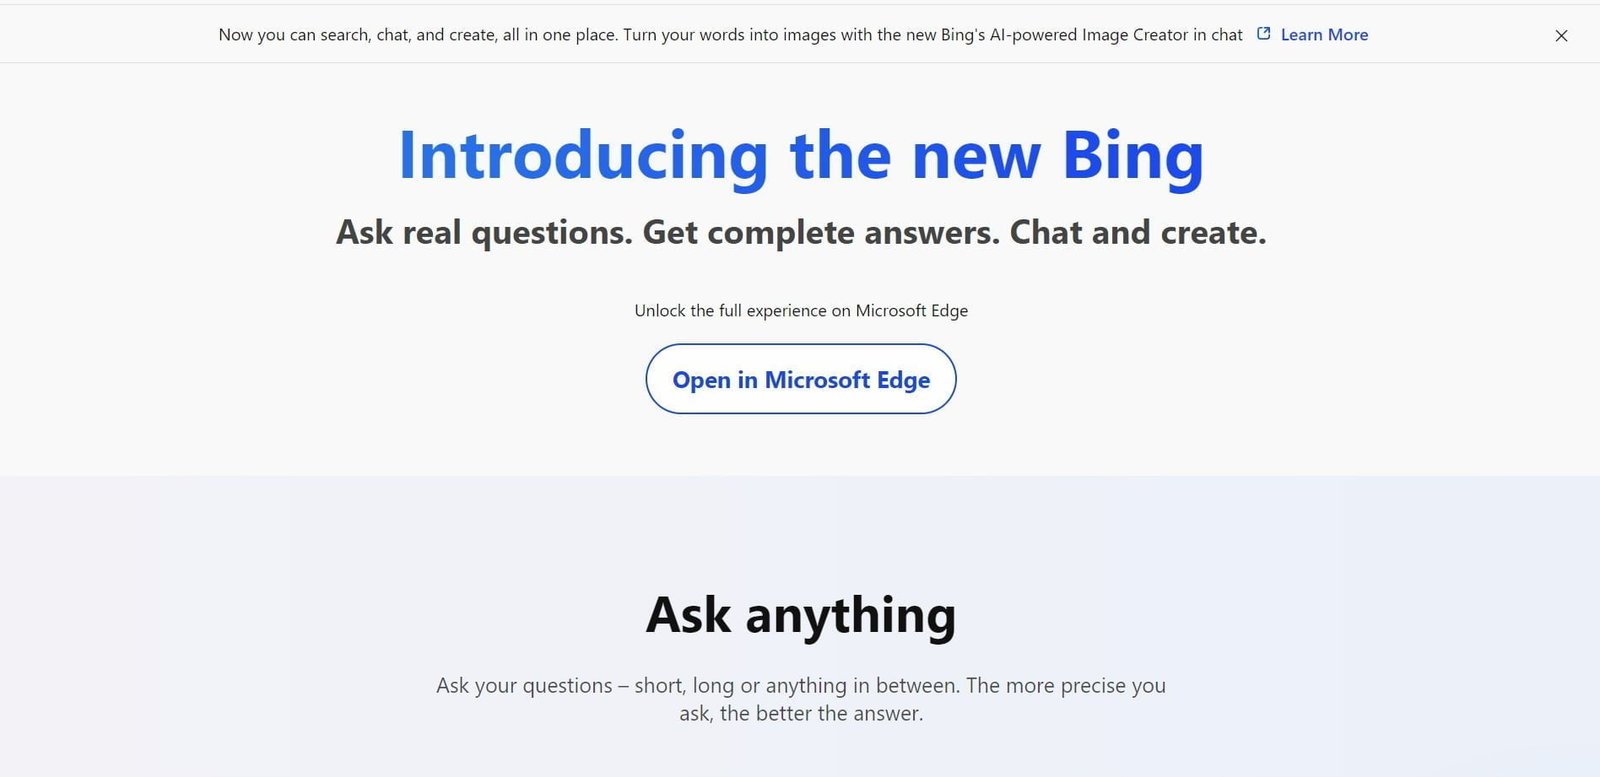 Bing AI Chatbot is an AI-powered chatbot that is your research assistant